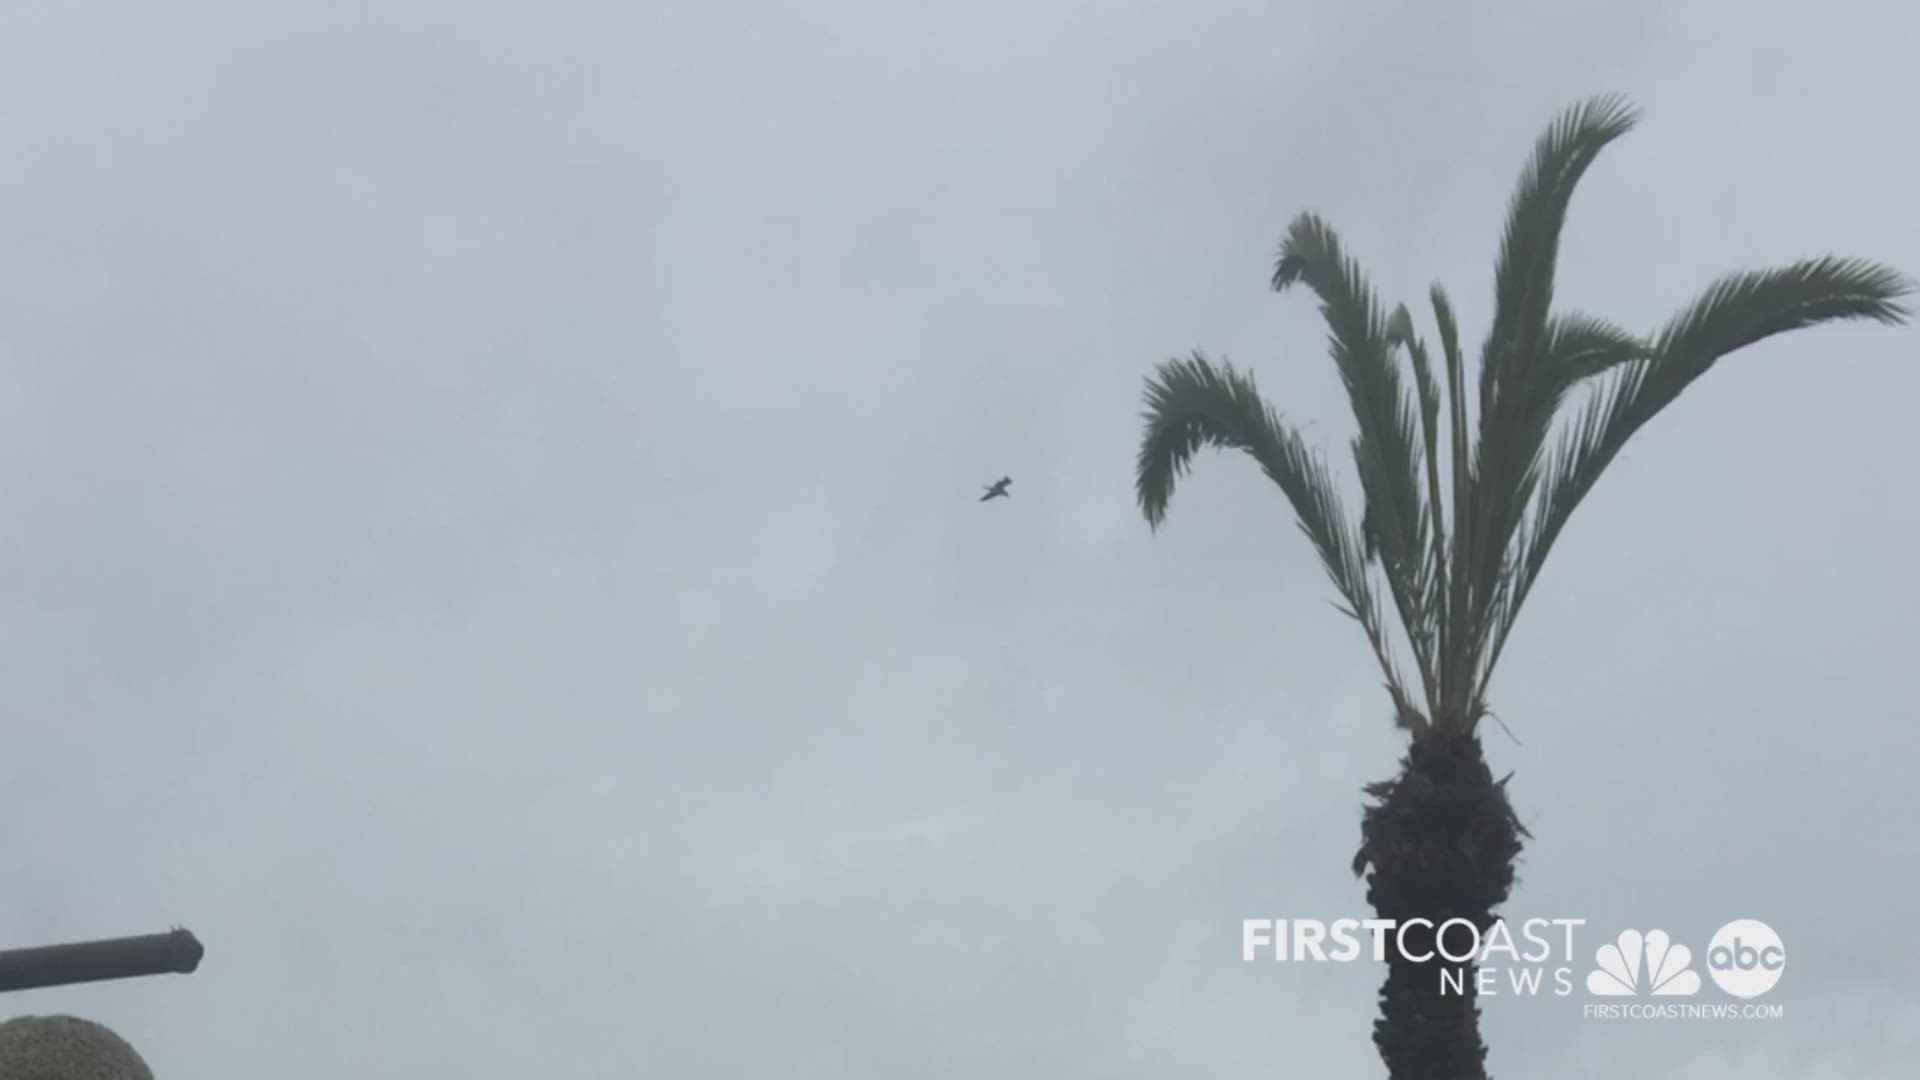 Some arborist are saying that the trees at The Fort in St. Augustine were poorly trimmed.